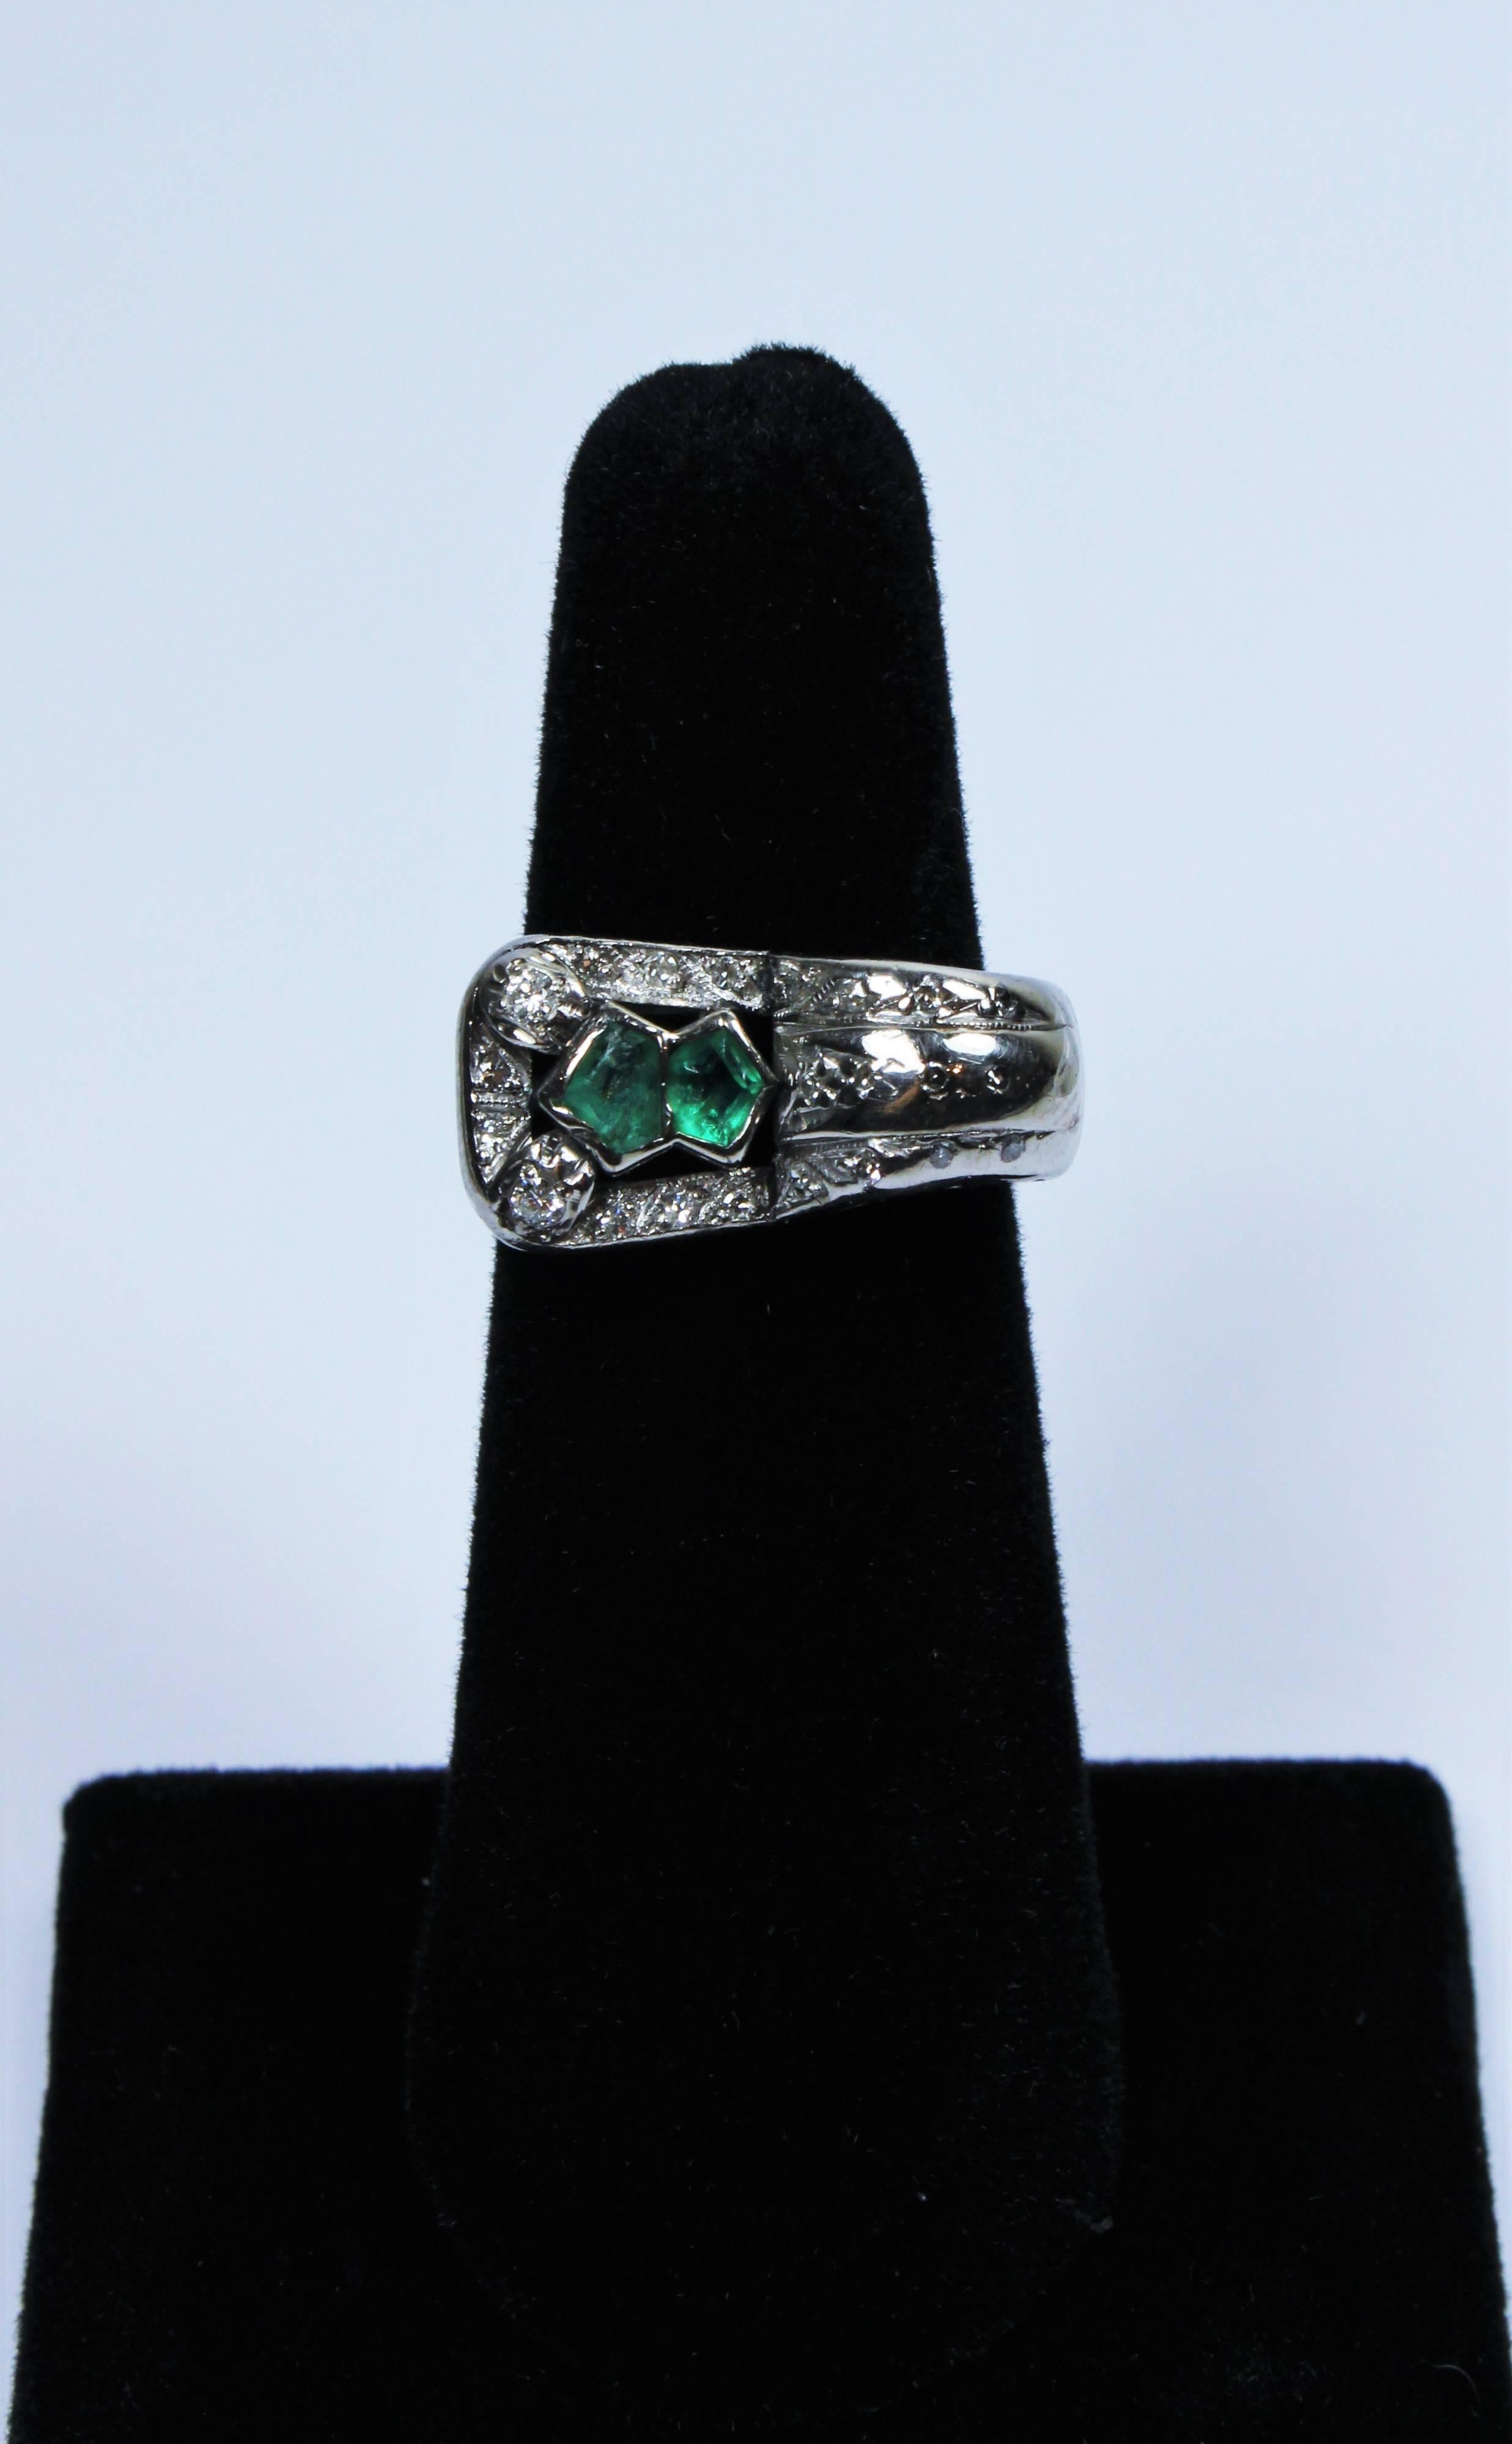 This vintage ring is available for viewing at The Paper Bag Princess of Beverly Hills Boutique. We offer a large selection of fine luxury items.

 This ring is composed of 14KT gold featuring emeralds and is accented with diamonds. 

Please feel